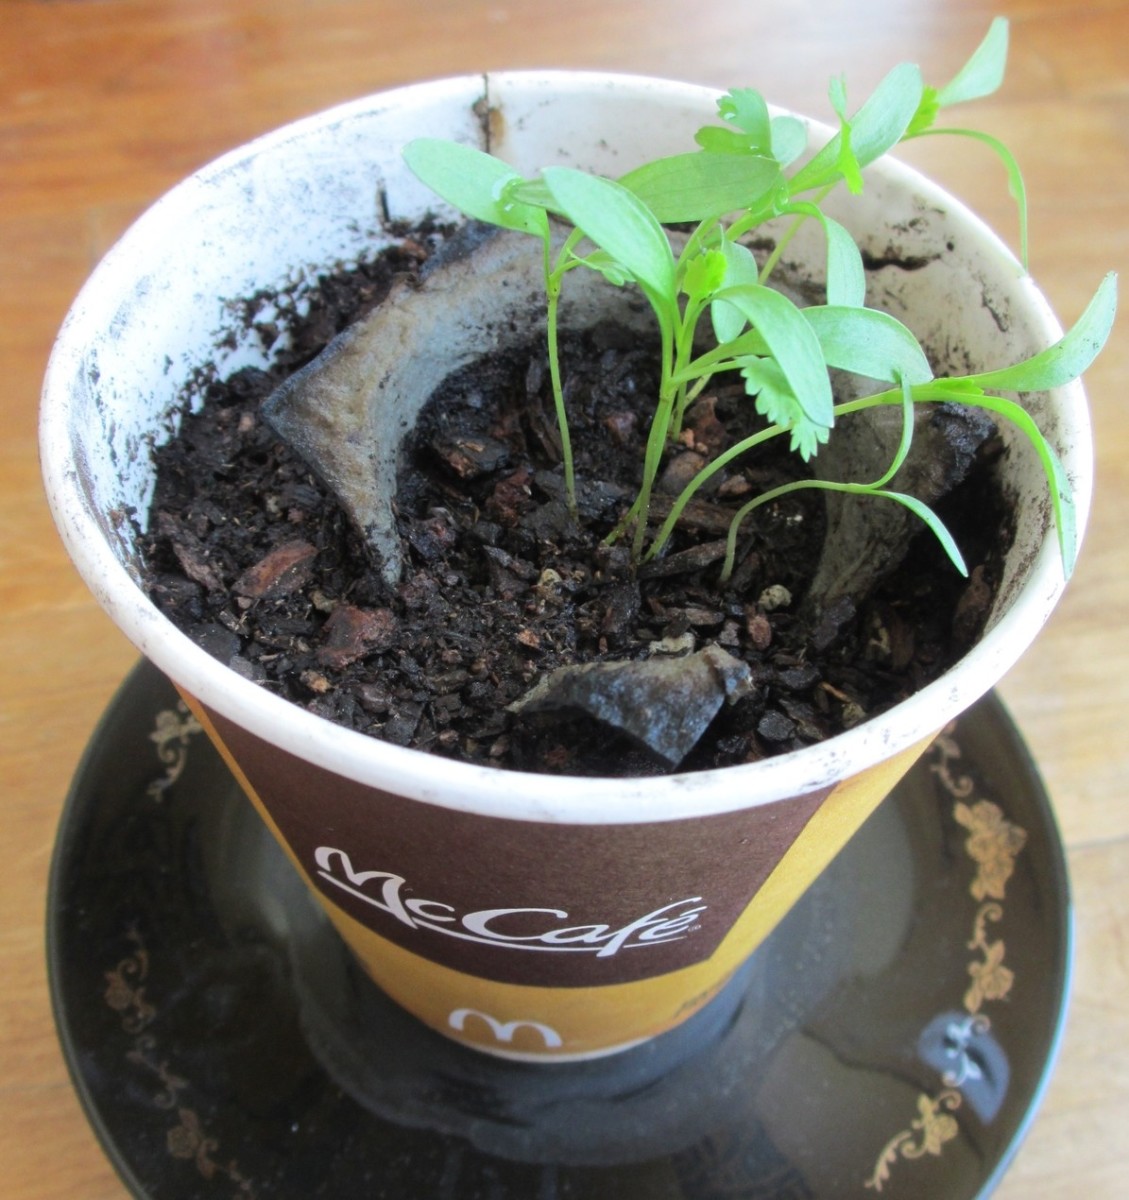 Seedlings can also be replanted into a pot or other container after sprouting.